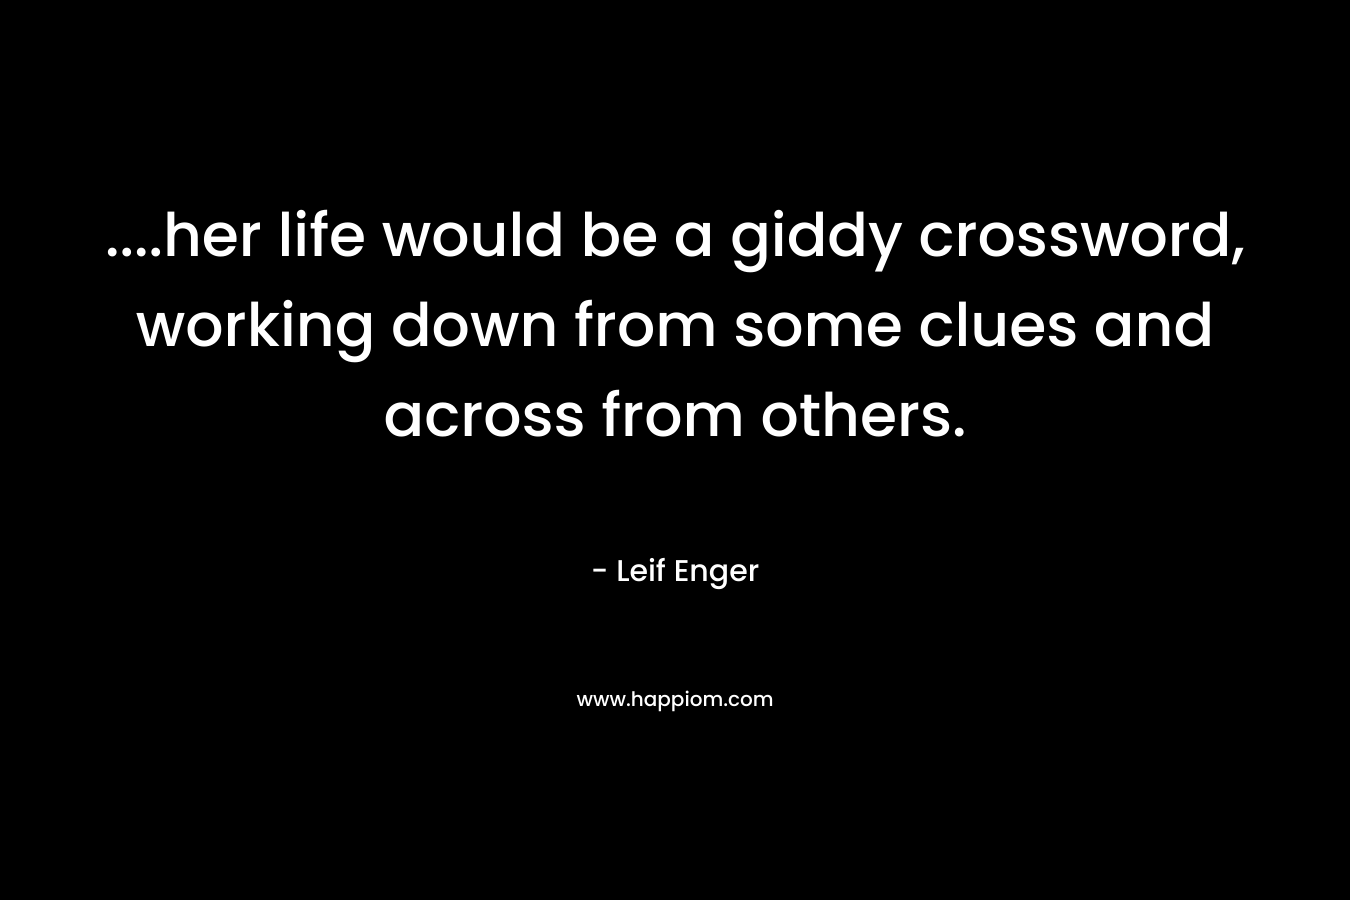 ....her life would be a giddy crossword, working down from some clues and across from others.